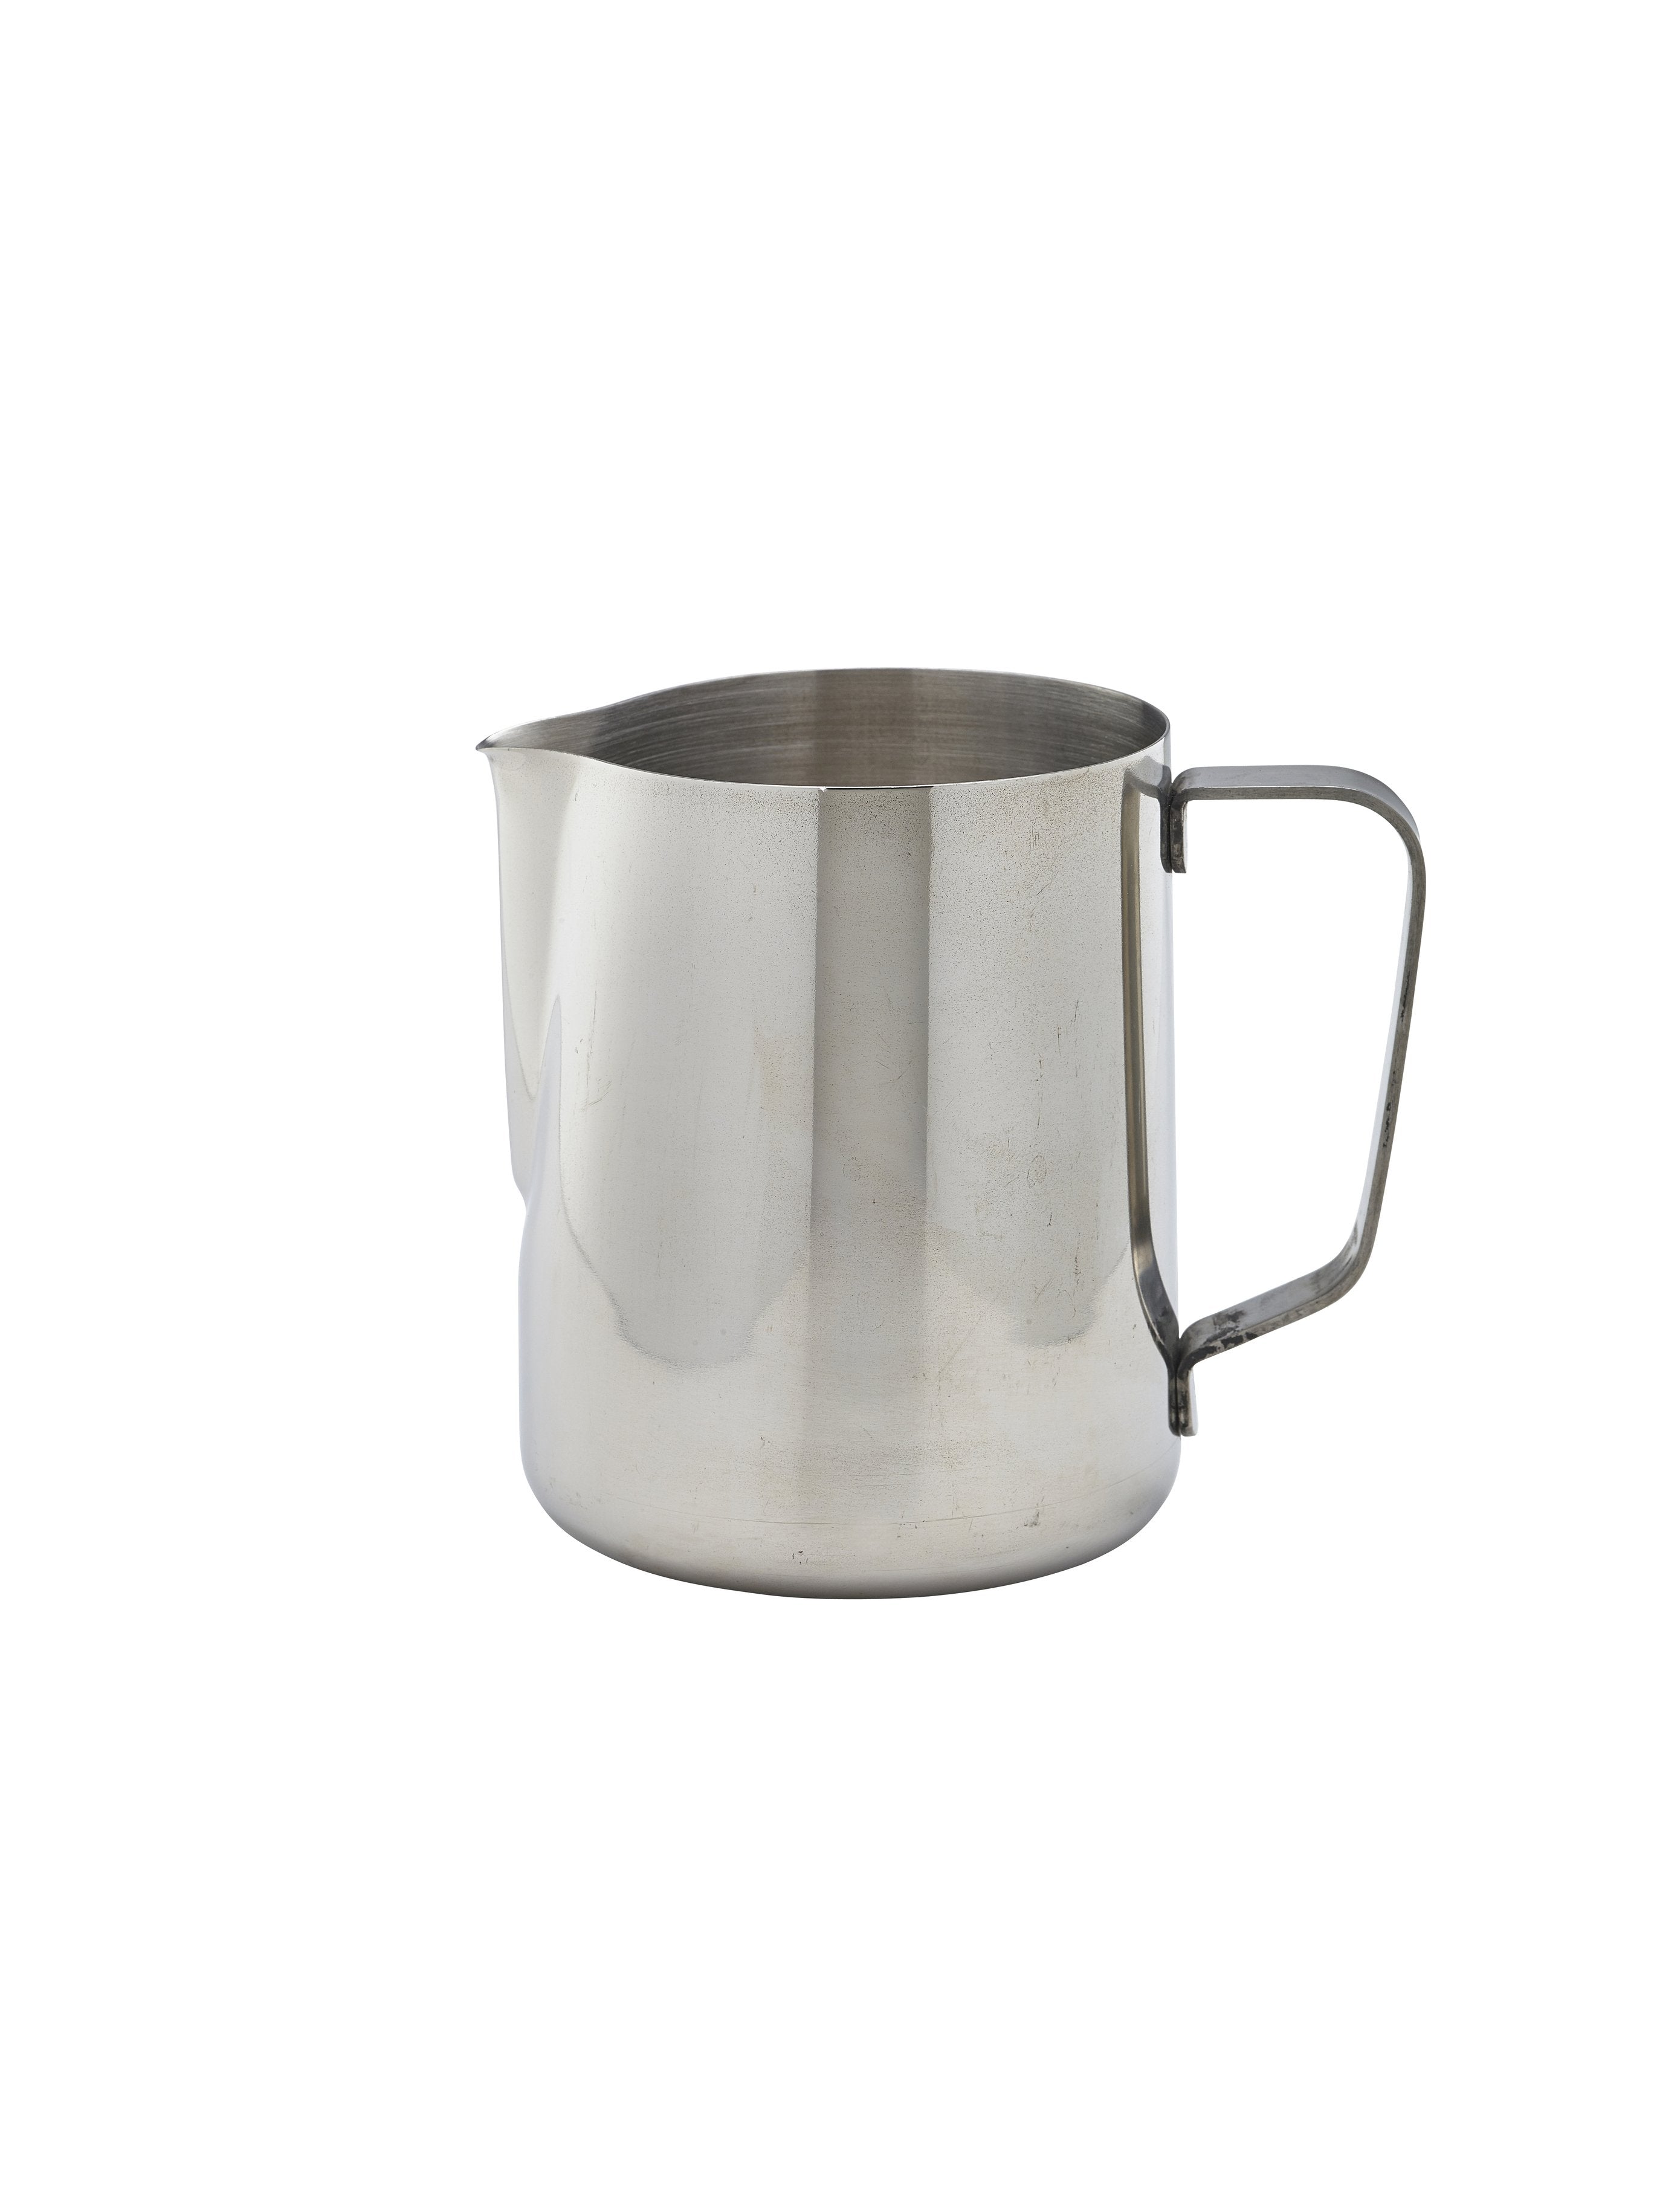 GenWare Stainless Steel Conical Jug 34cl/12oz